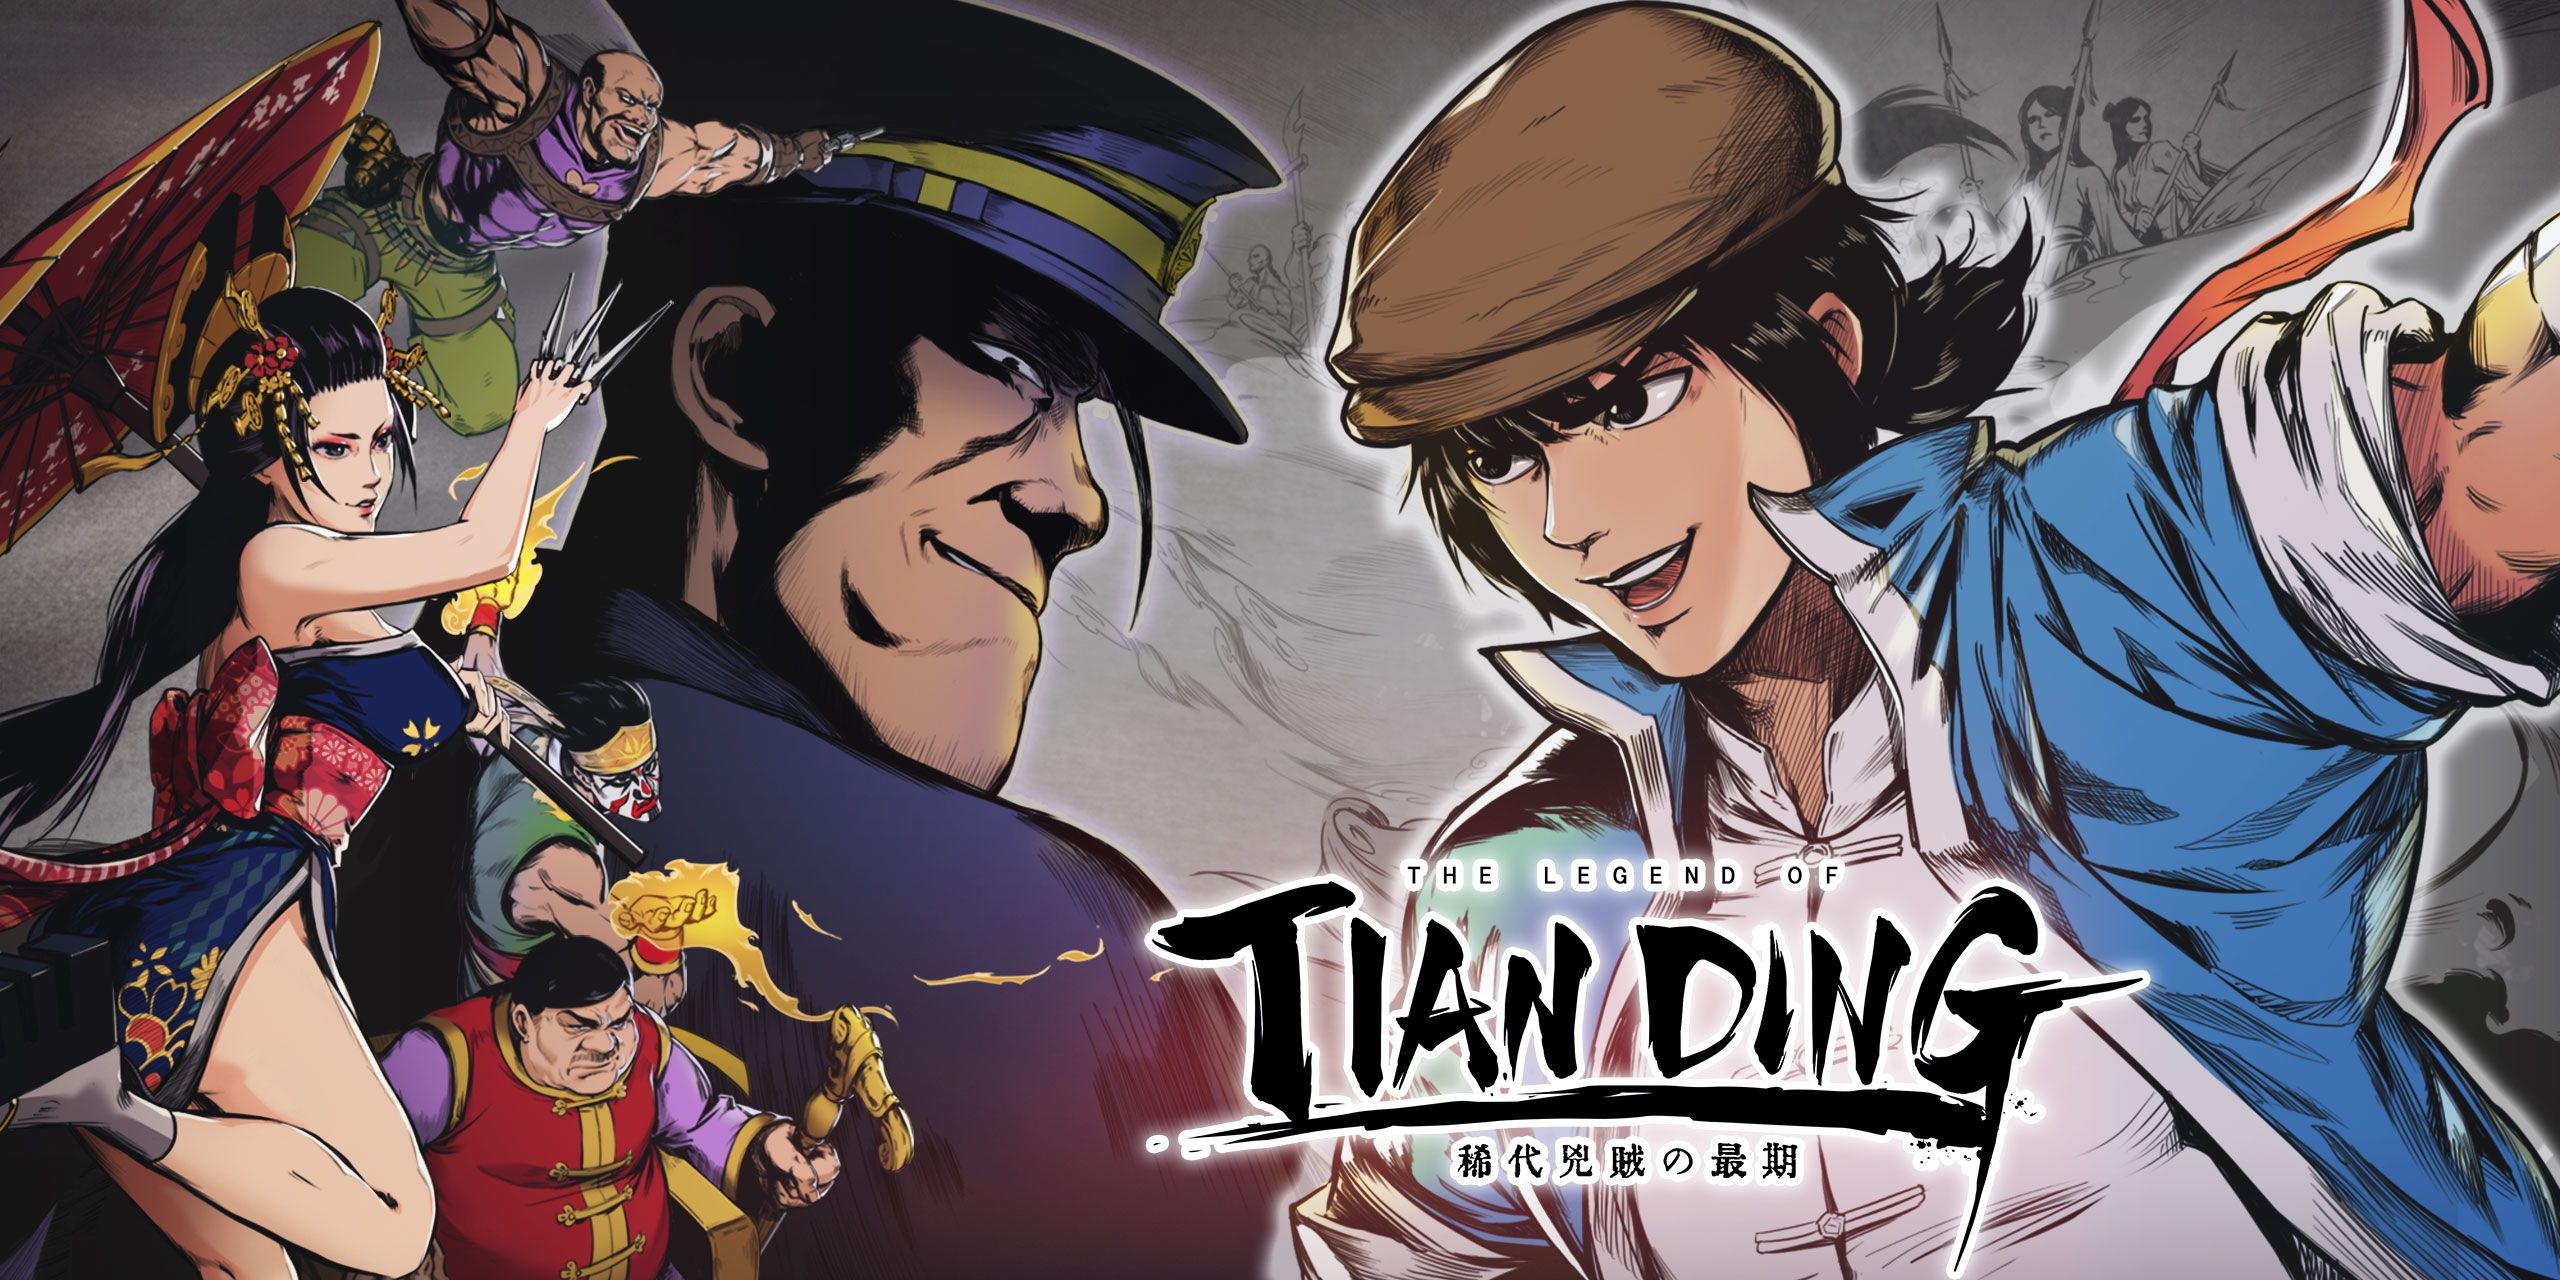 Cover Art for The Legend of Tianding featuring a collage of several characters and the game logo.